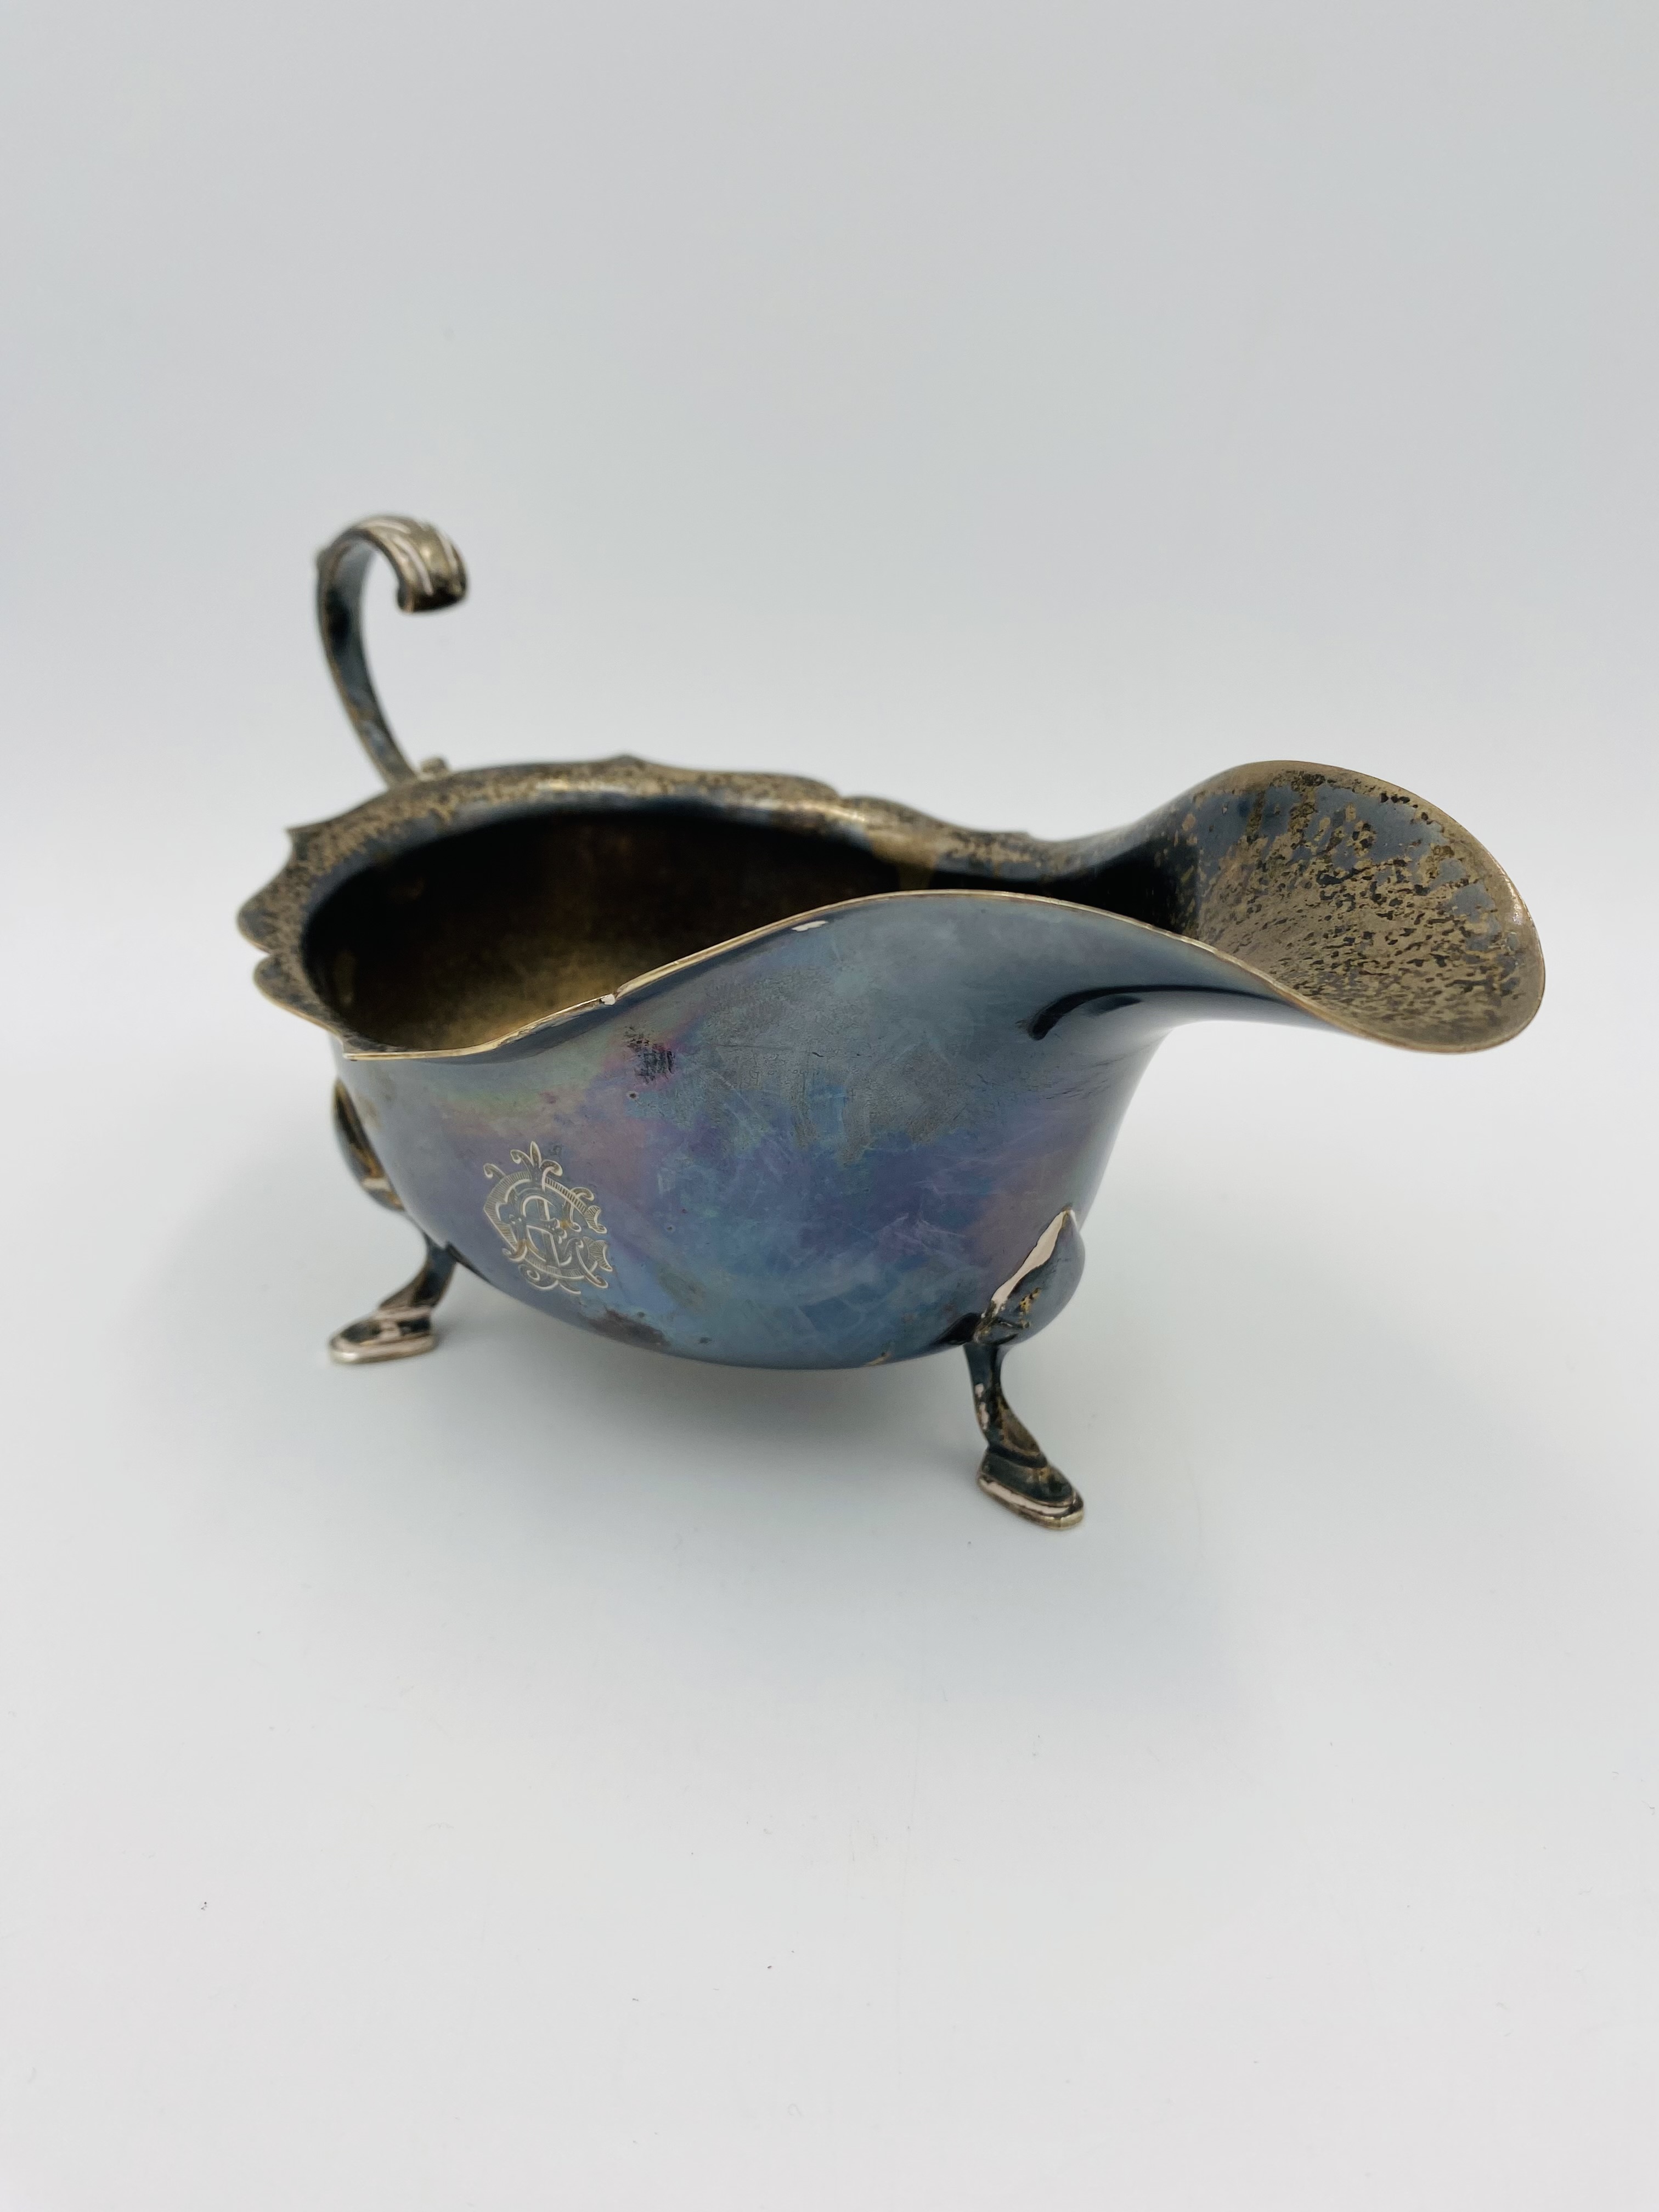 Silver sauce boat - Image 3 of 3